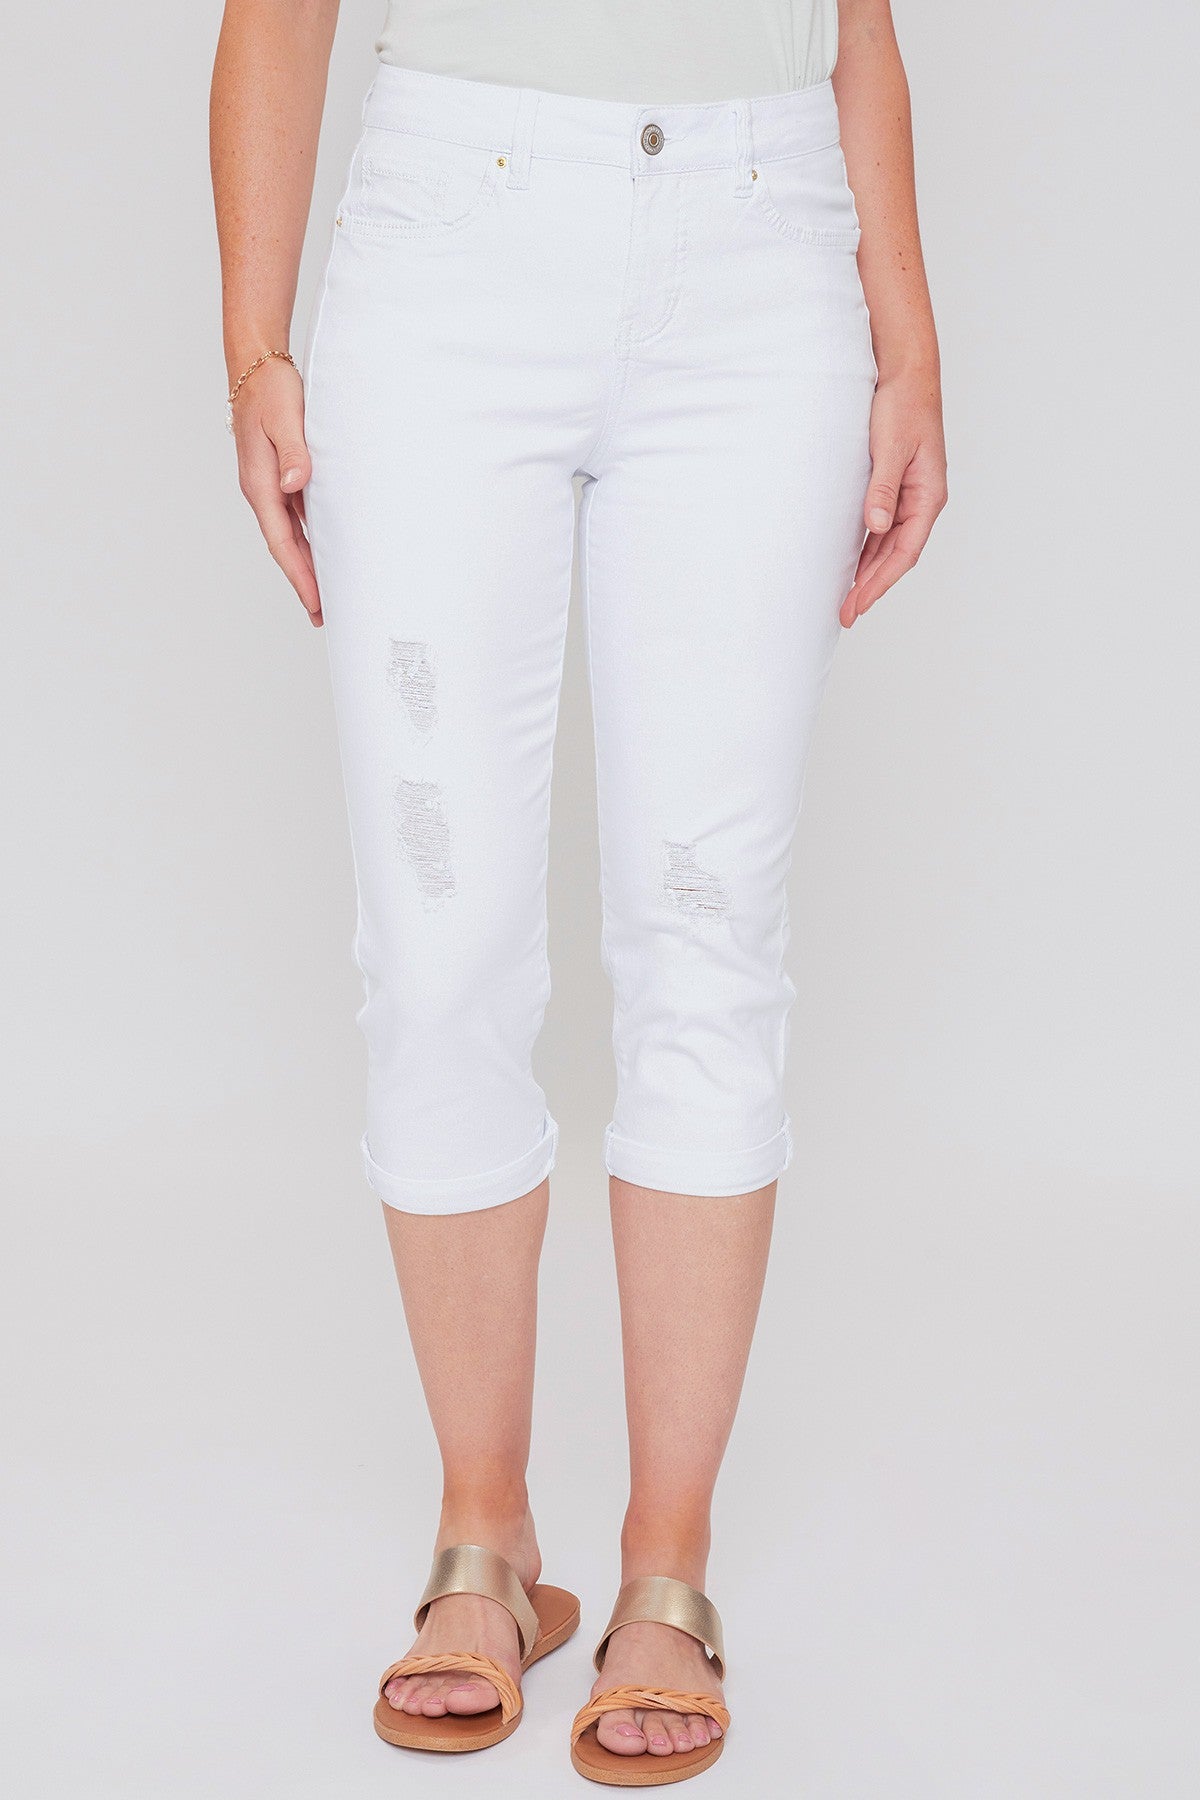 Missy Slim Stretch Cuffed Capri Jeans, Pack Of 12 from Royalty for Me – YMI  JEANS WHOLESALE